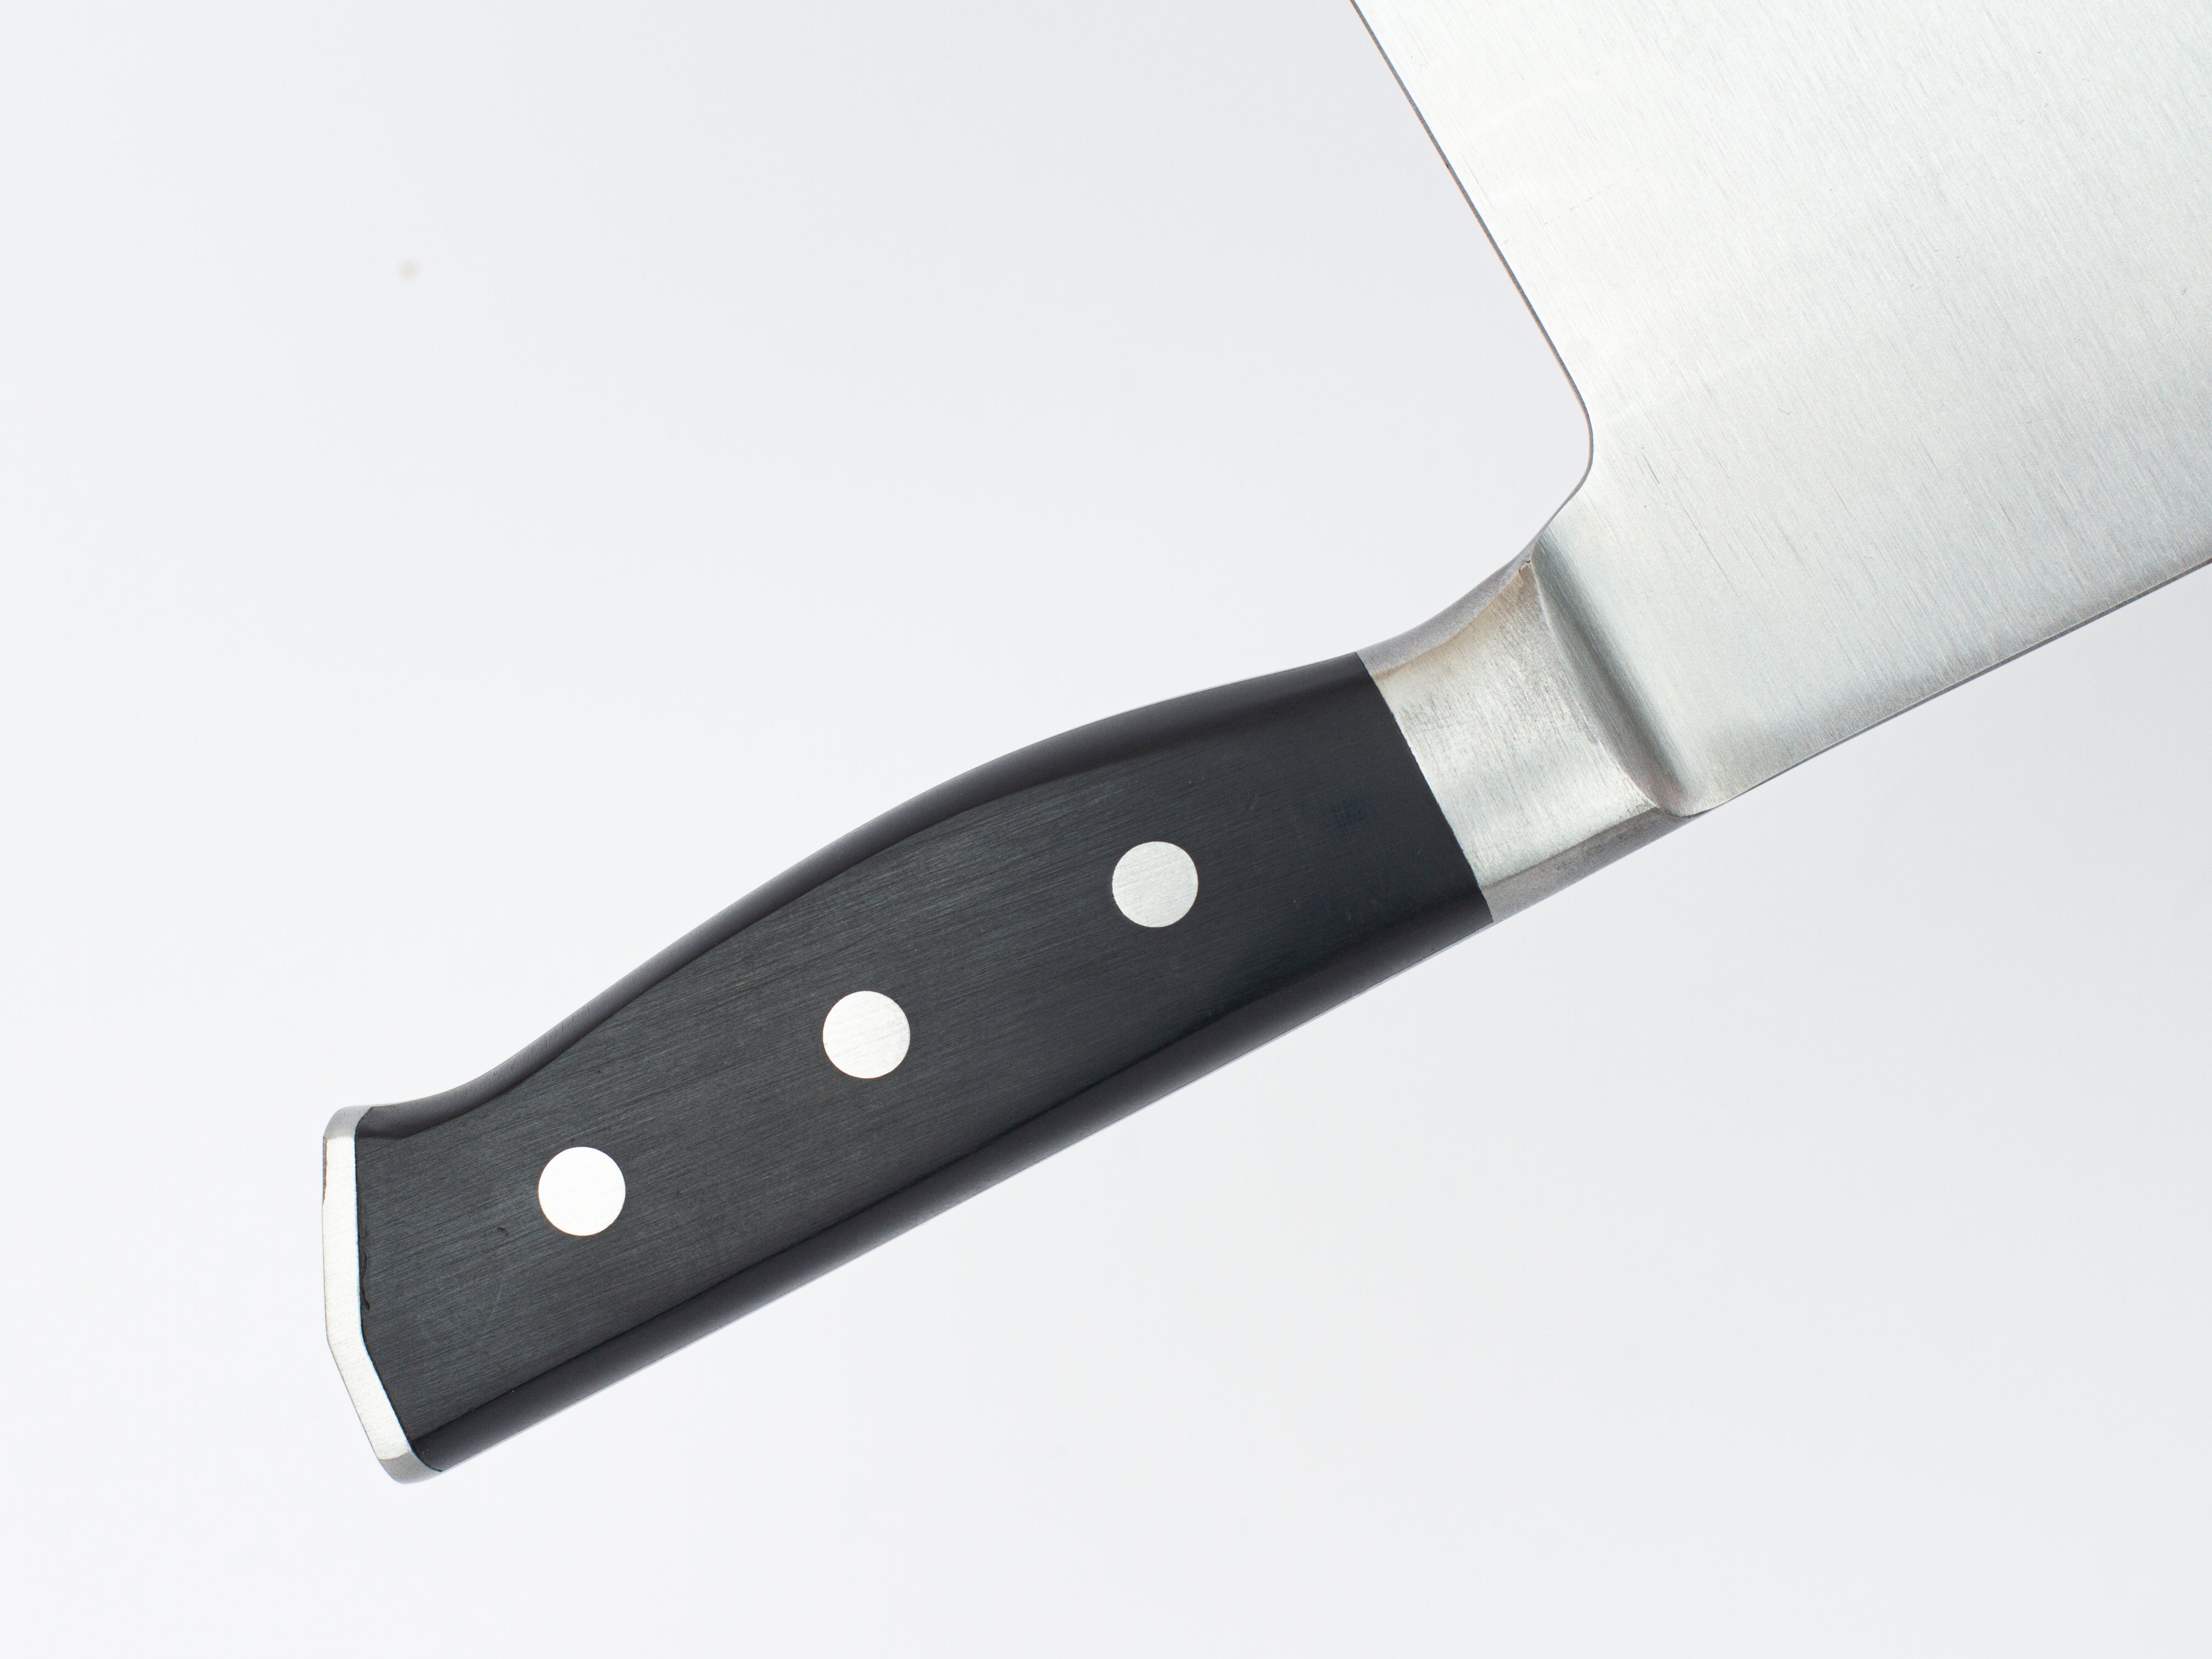 Forged Chinese Cleaver Classic